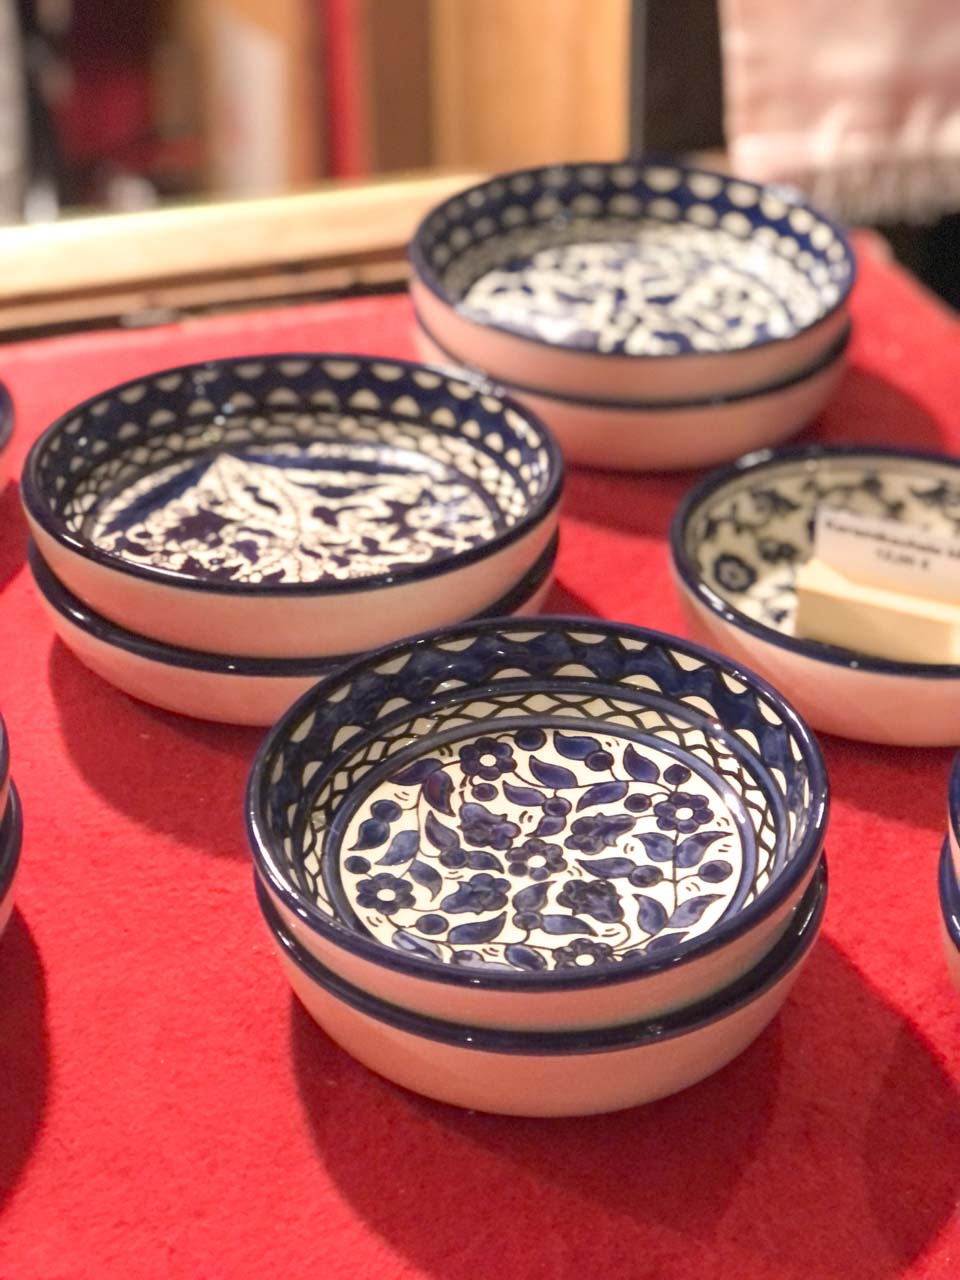 A collection of hand-painted blue and white ceramic bowls, featuring intricate patterns, available at a crafts stall at the Nuremberg Christmas Market